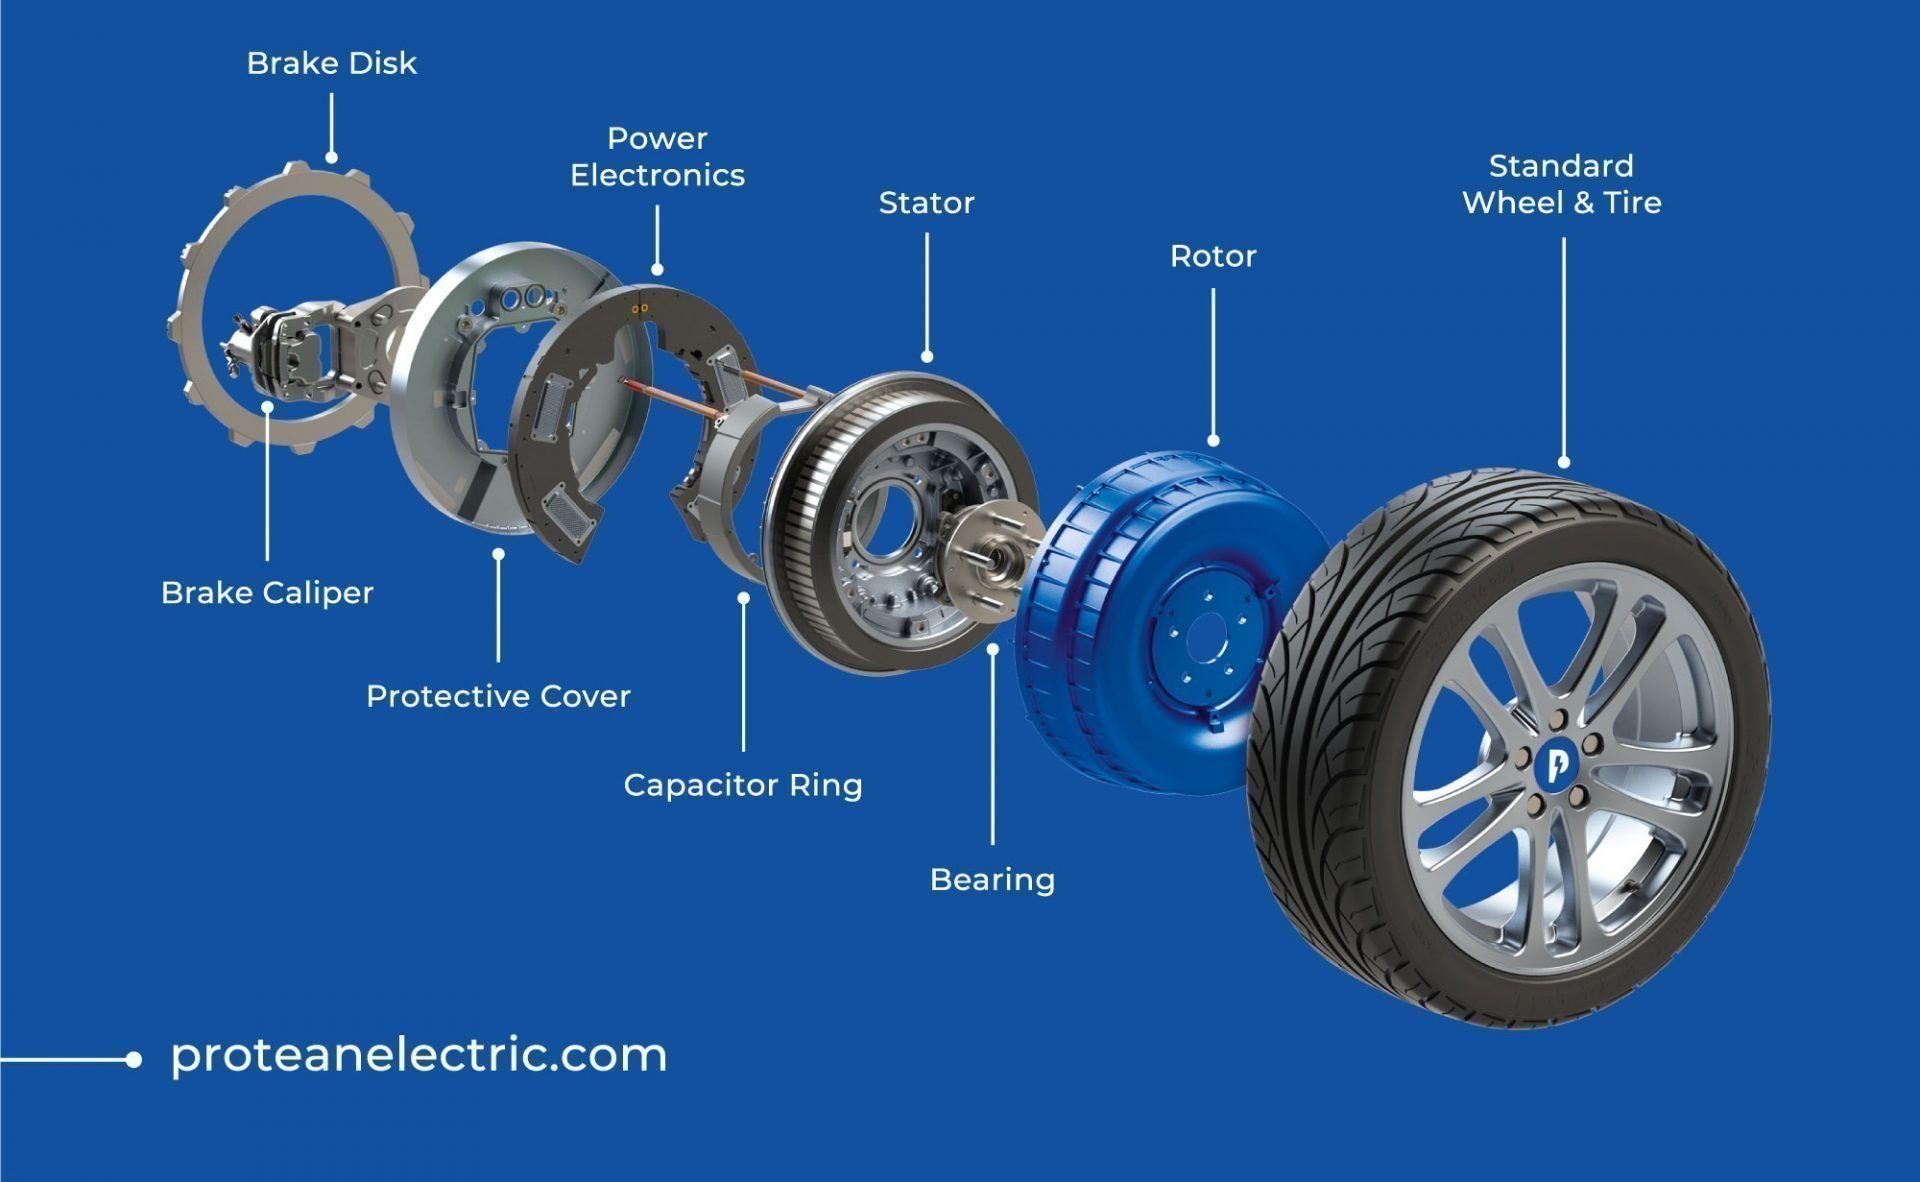 Alcon Innovation Delivers Bespoke Braking Solution to Protean Electric